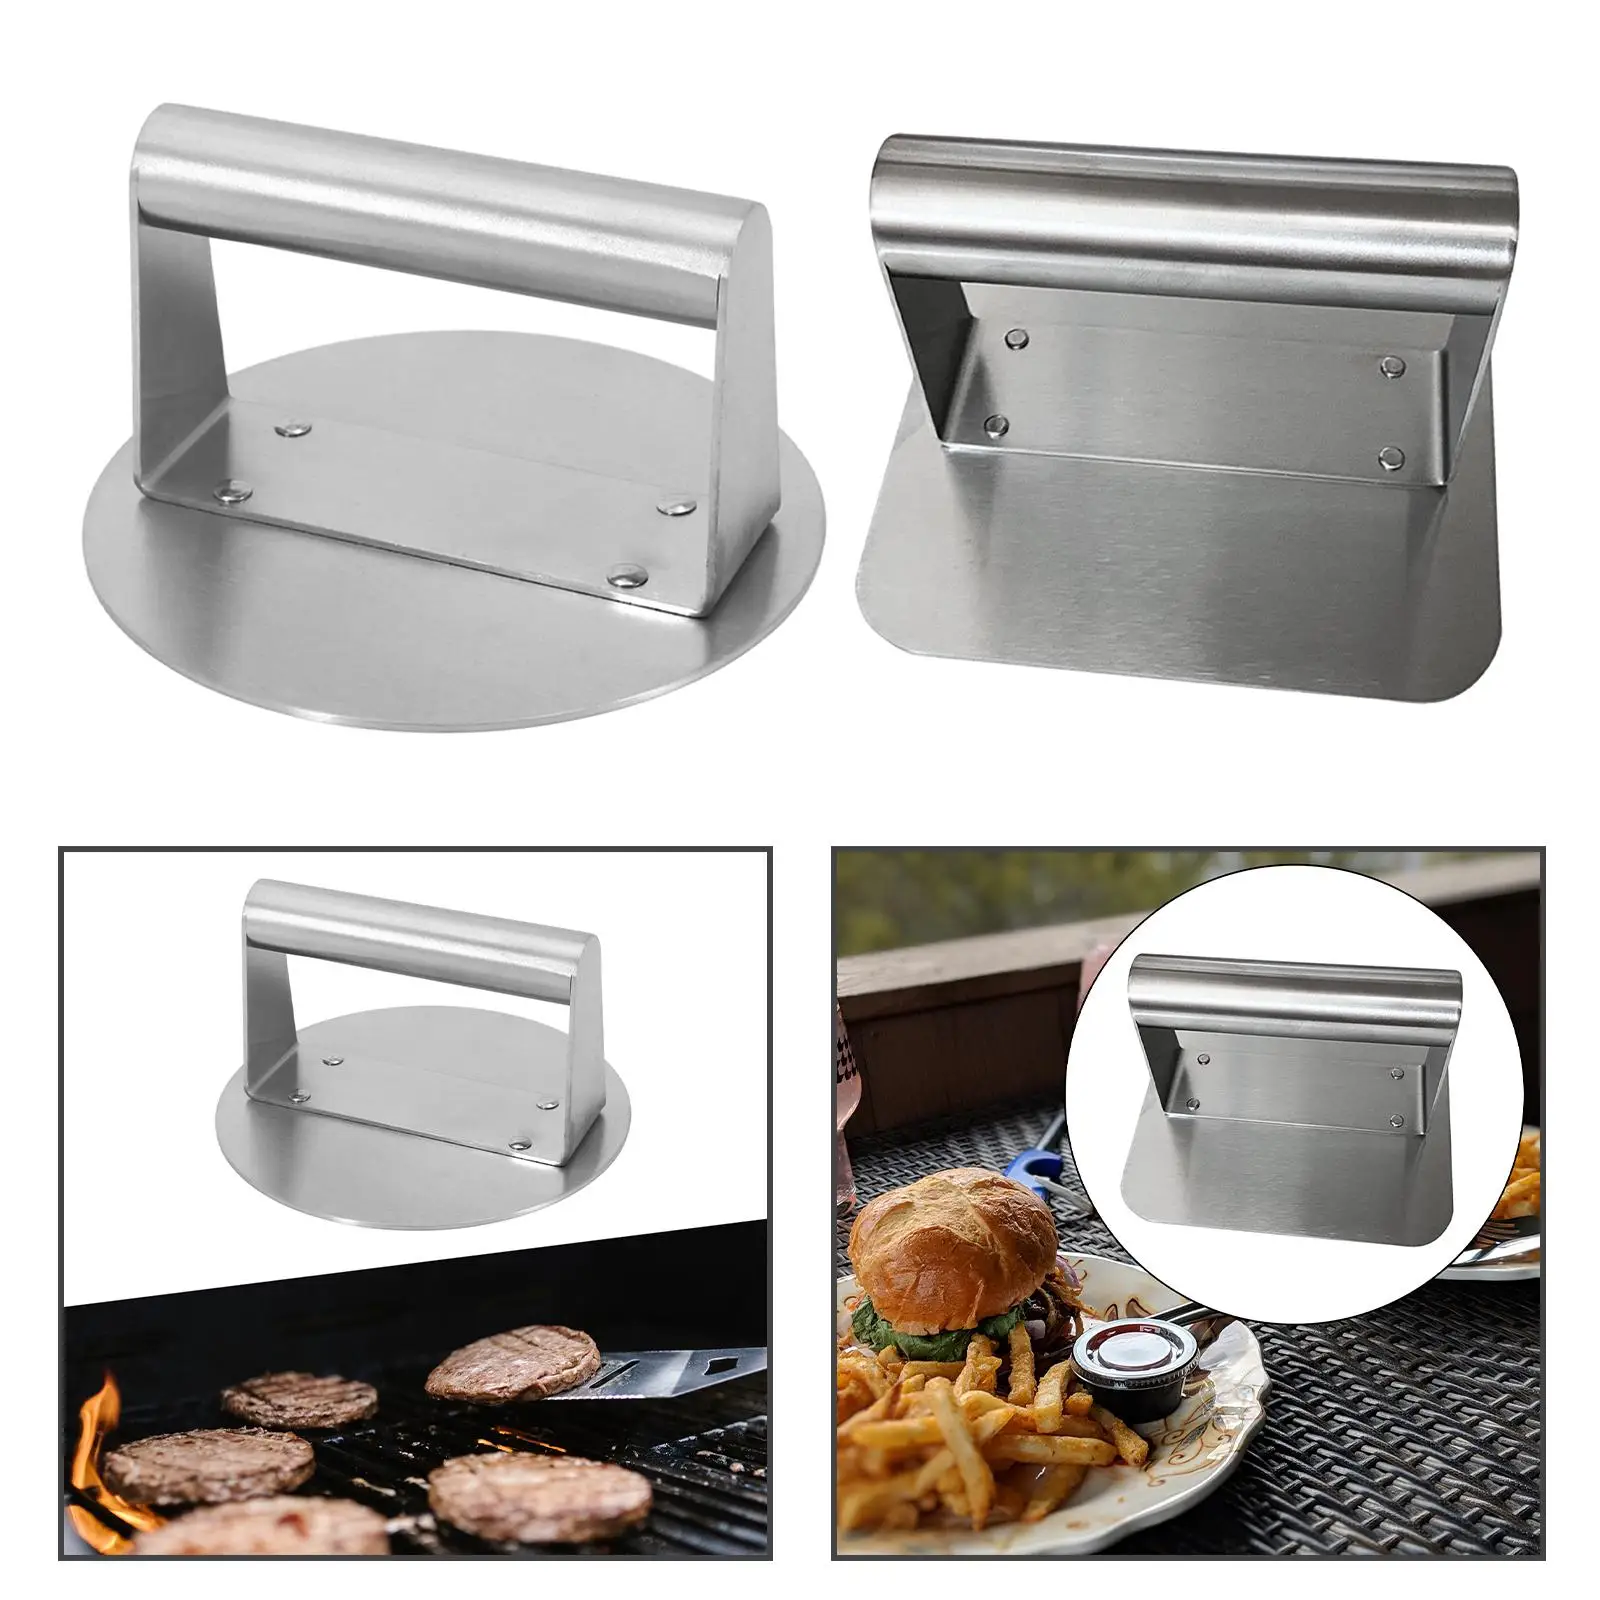 BBQ Press Burger Smasher Smooth Nonstick Meat Tenderisers Flat Cookie Presser for Cooking Sandwiches Flatbreads Steak Paninis